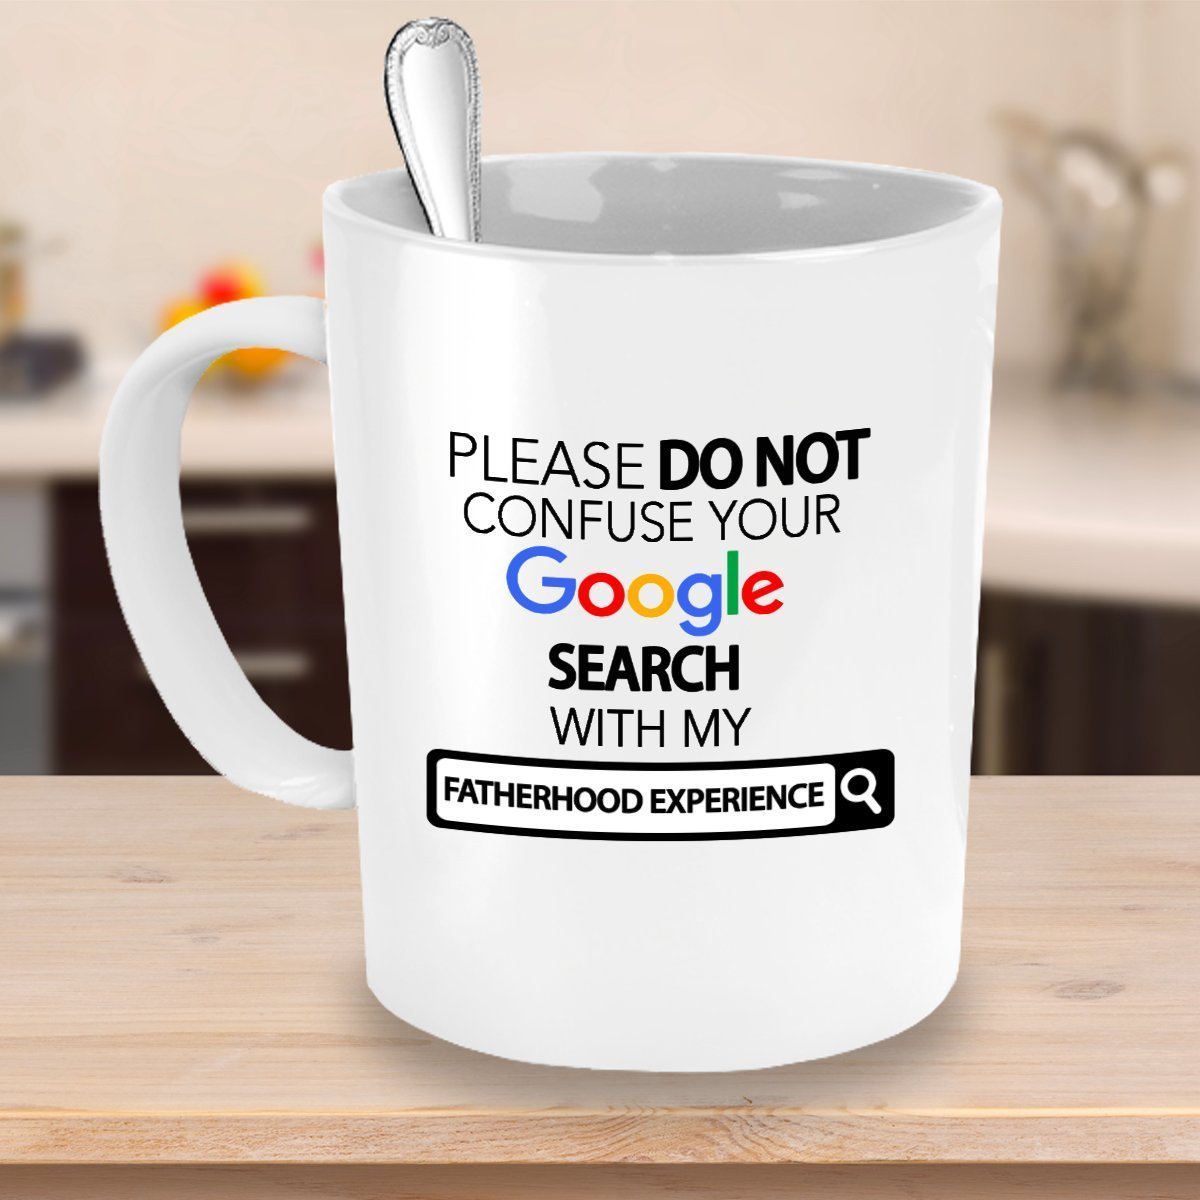 Personalized Gift For Her or Him - Funny Inexpensive Mug - Add In Job Position, Degree, Or Anything - Unique Special Present - Great Idea For Birthday, Christmas, Or Just Because - Customized Cup